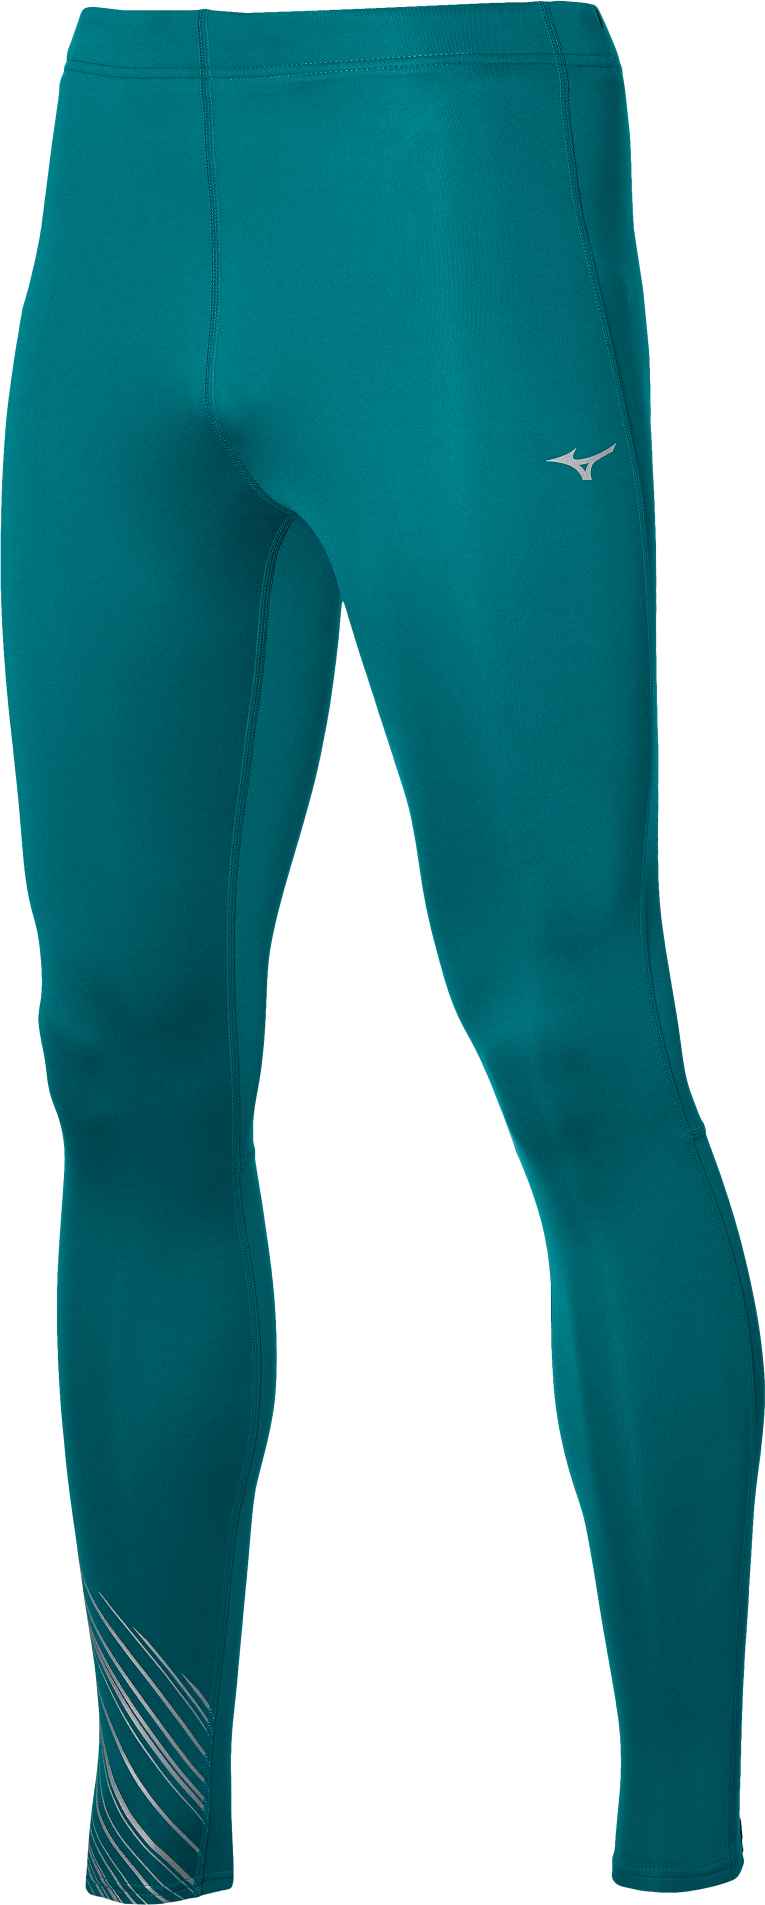 Men’s insulated elastic tights